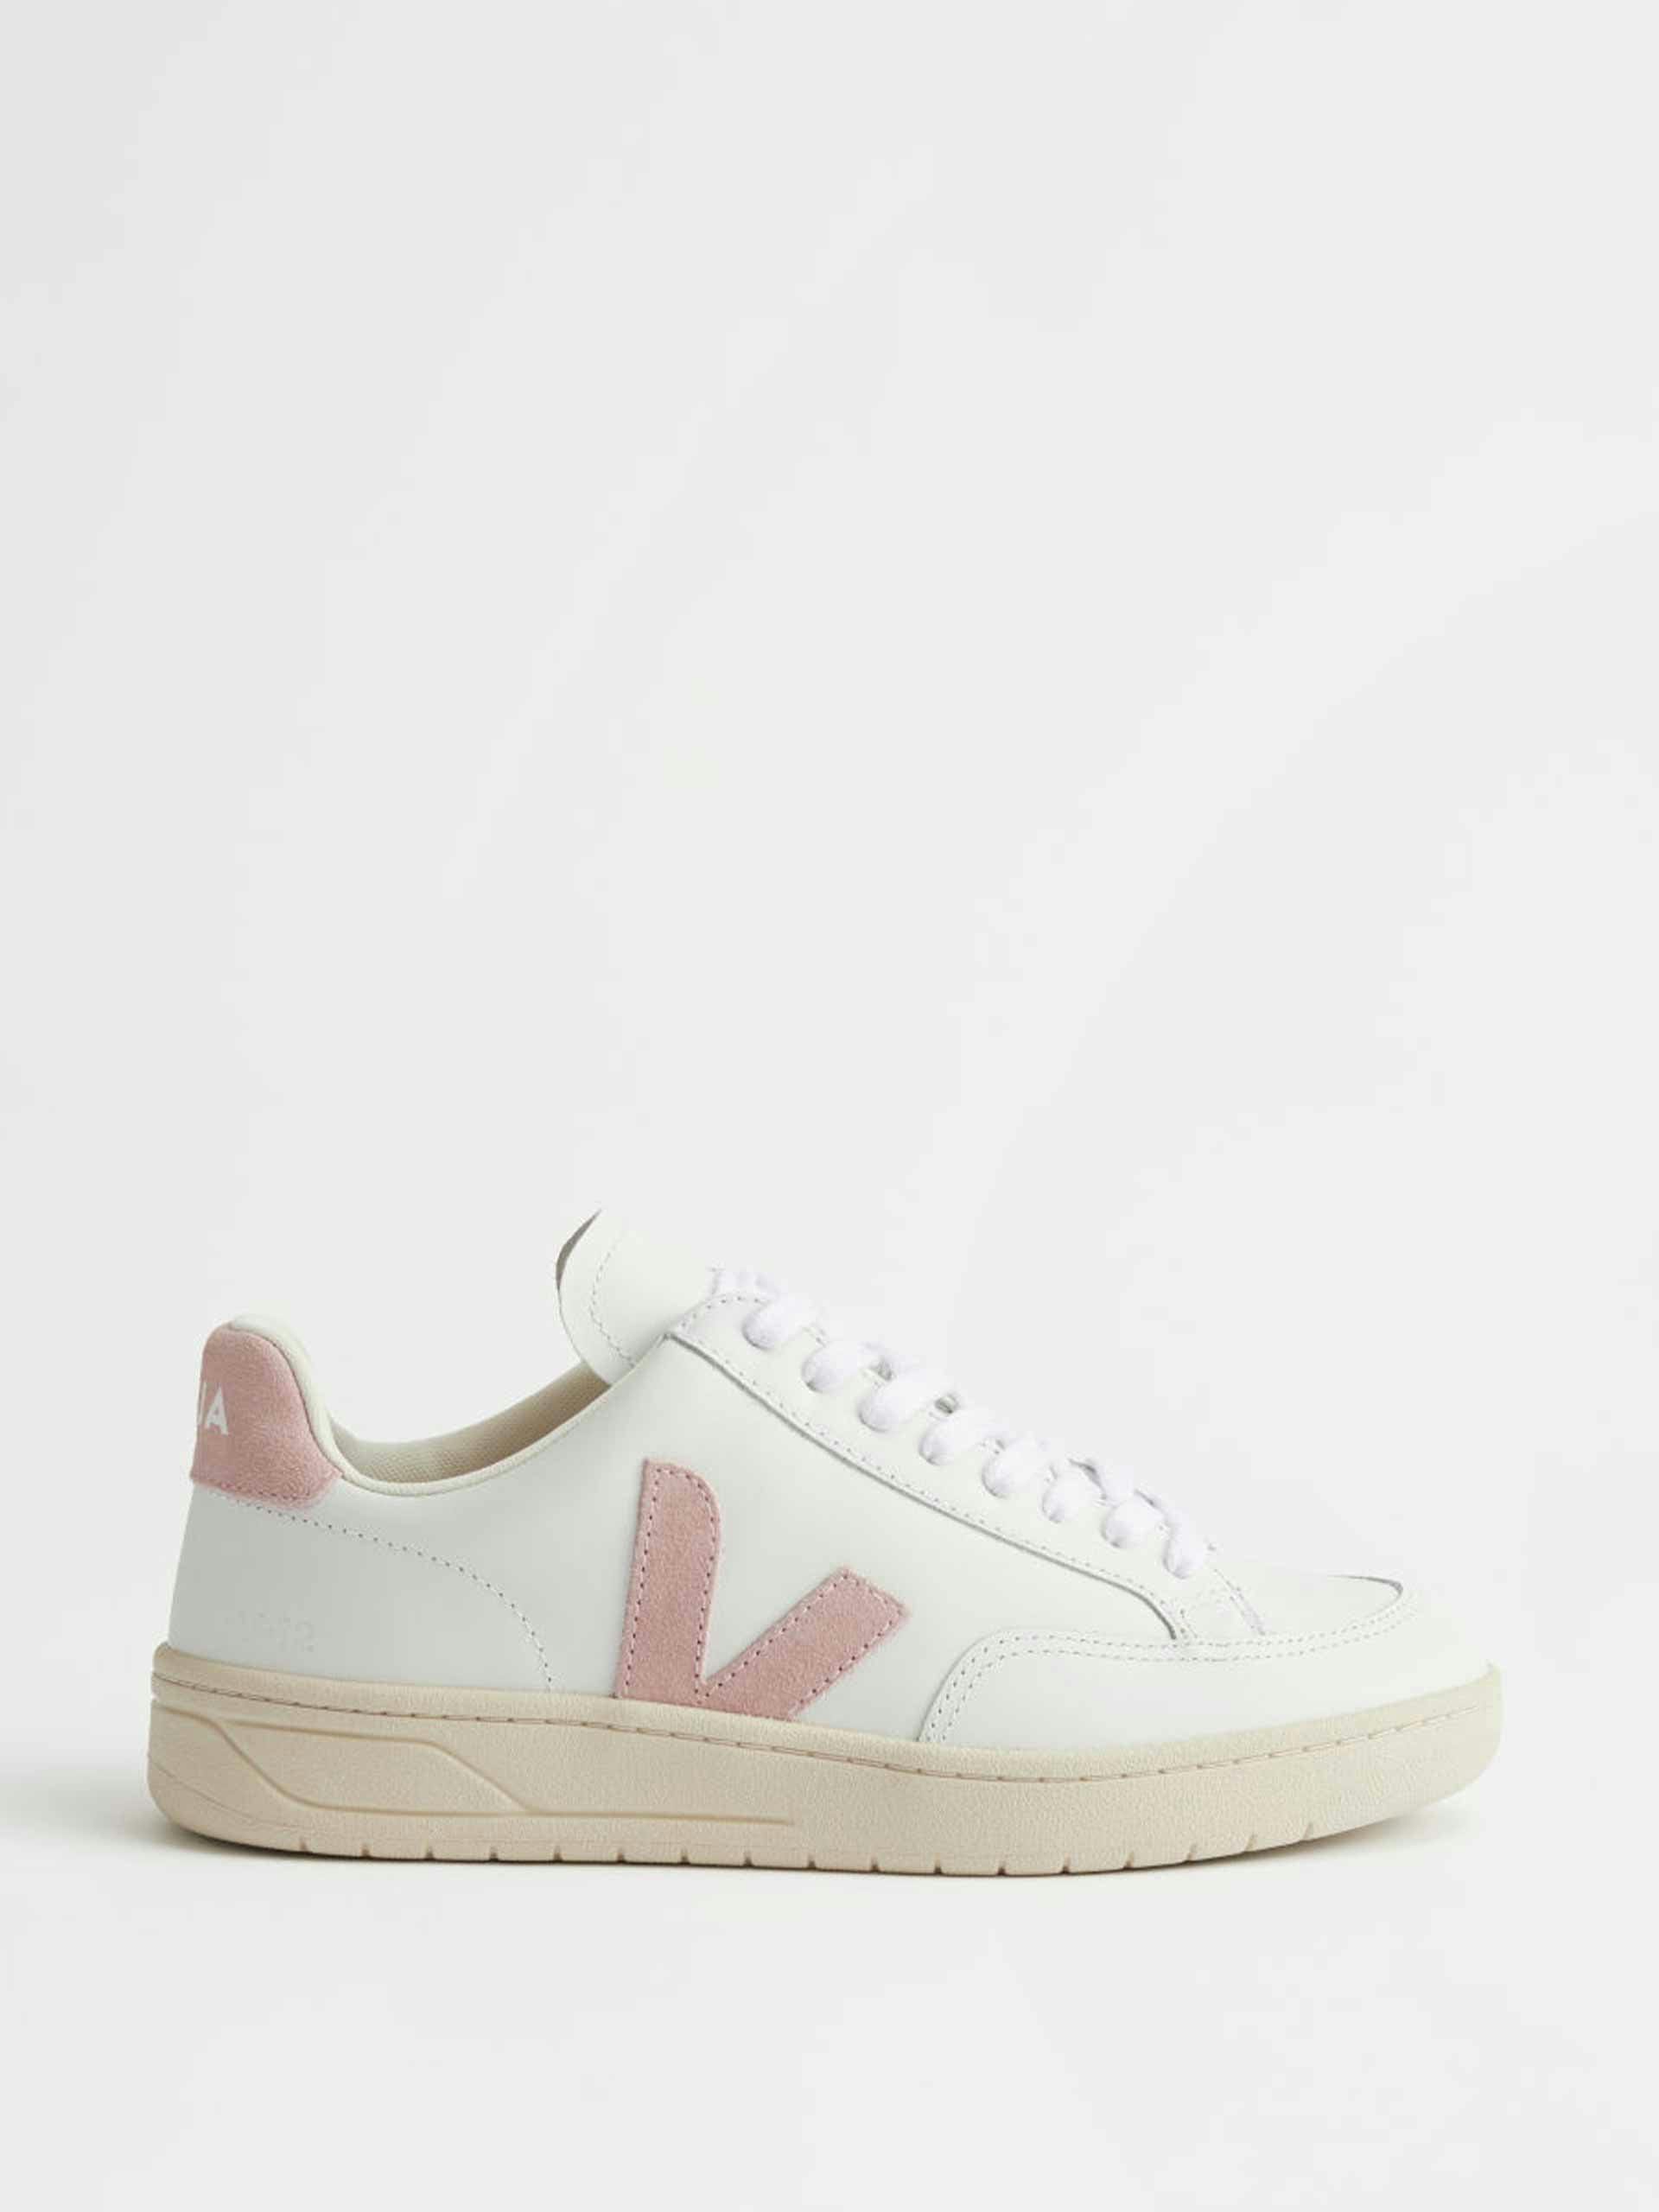 White and pink trainers